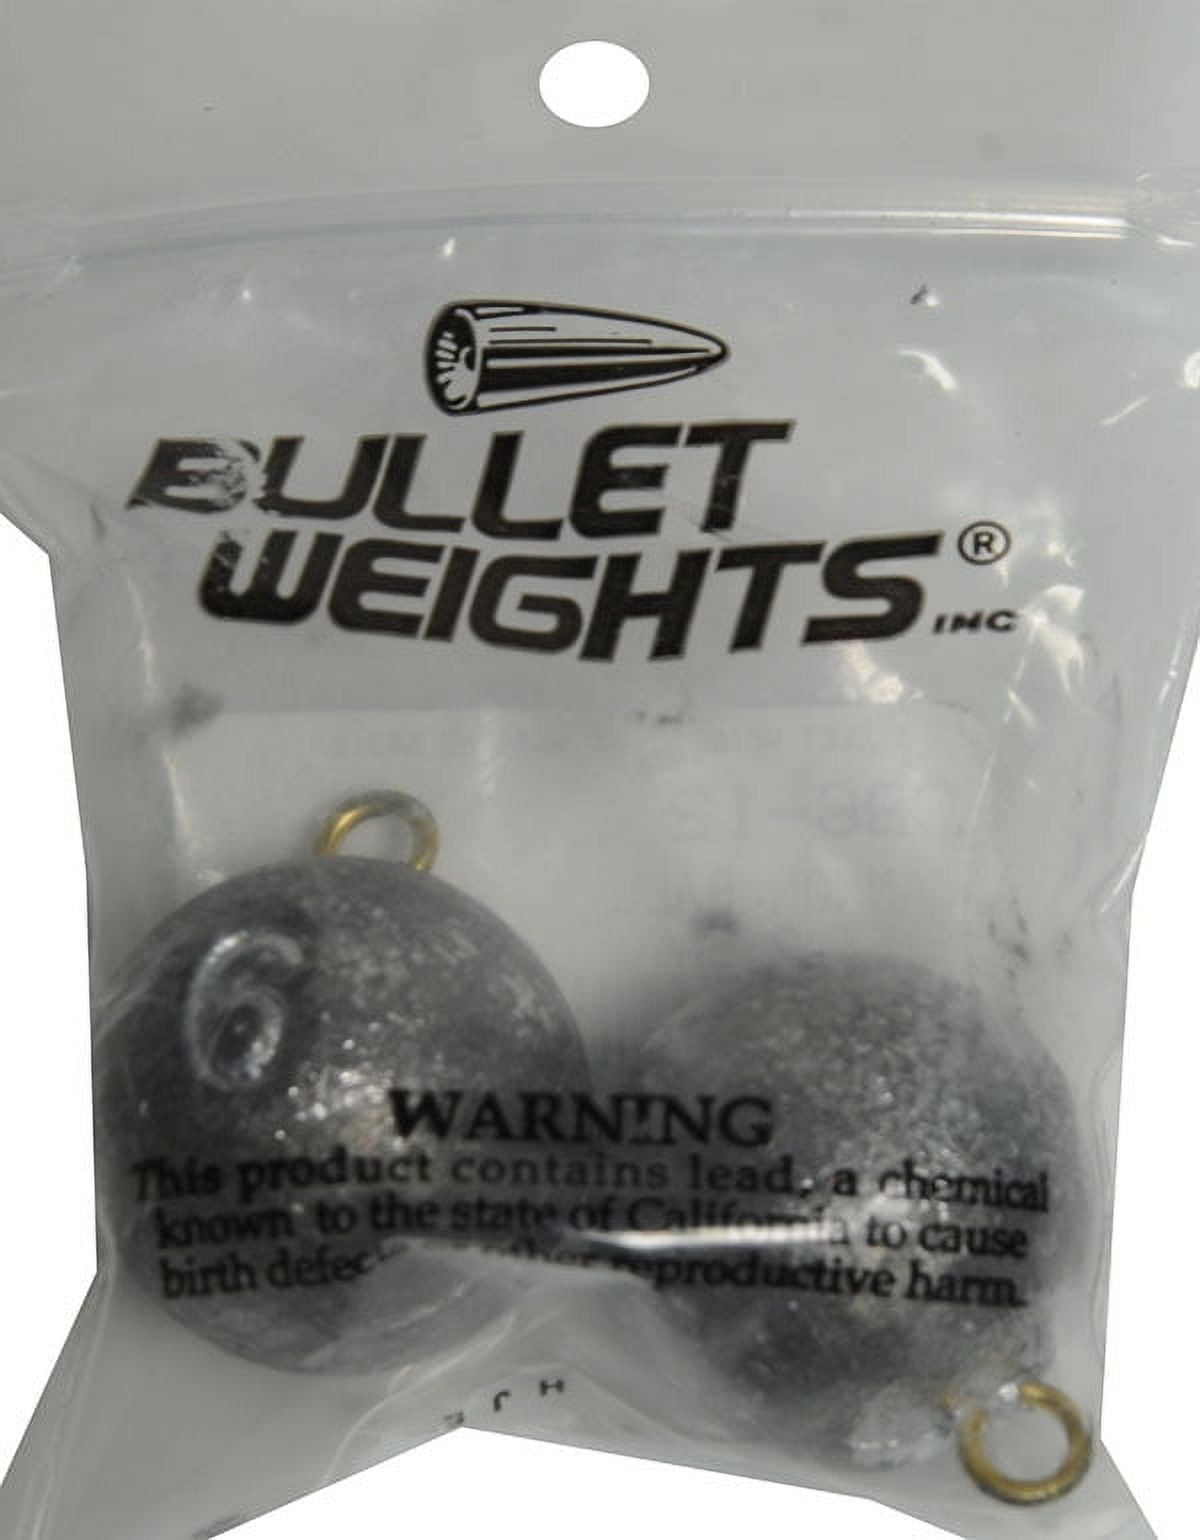 Bullet Weights® Cannon Ball 6 Oz., 2 sinkers 